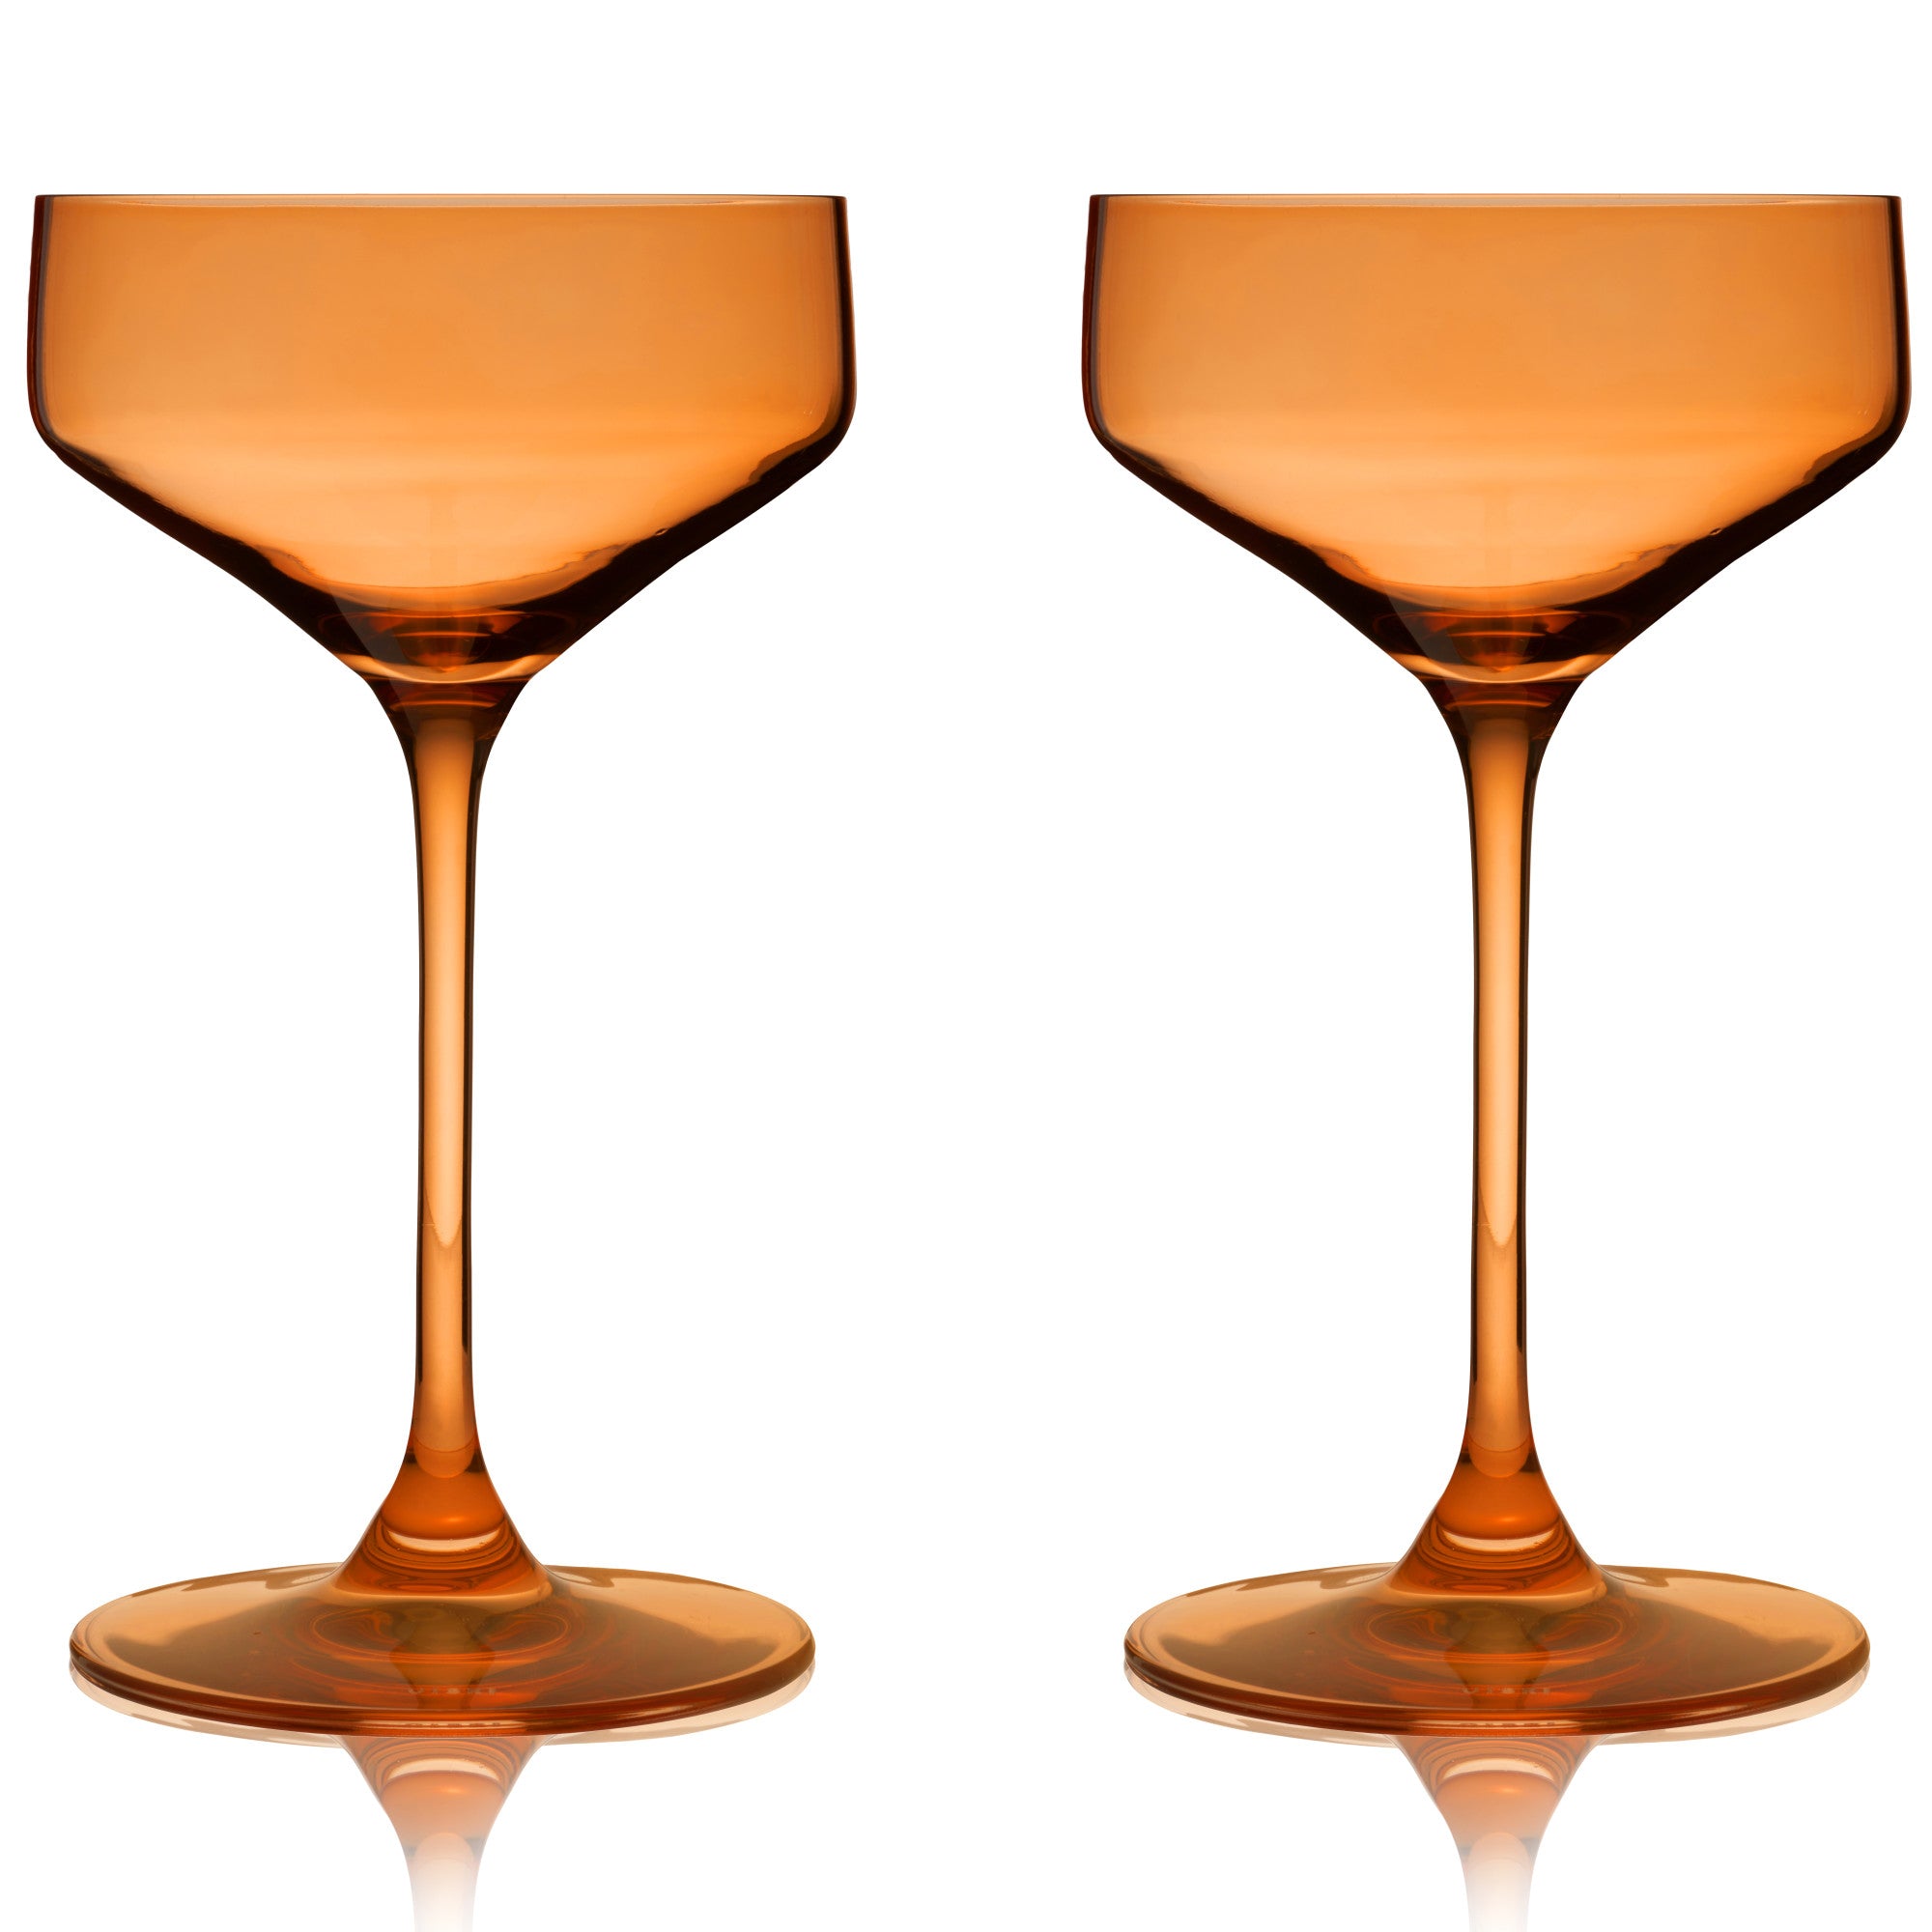 Reserve Nouveau Crystal Coupes in Amber by Viski (set of 2)